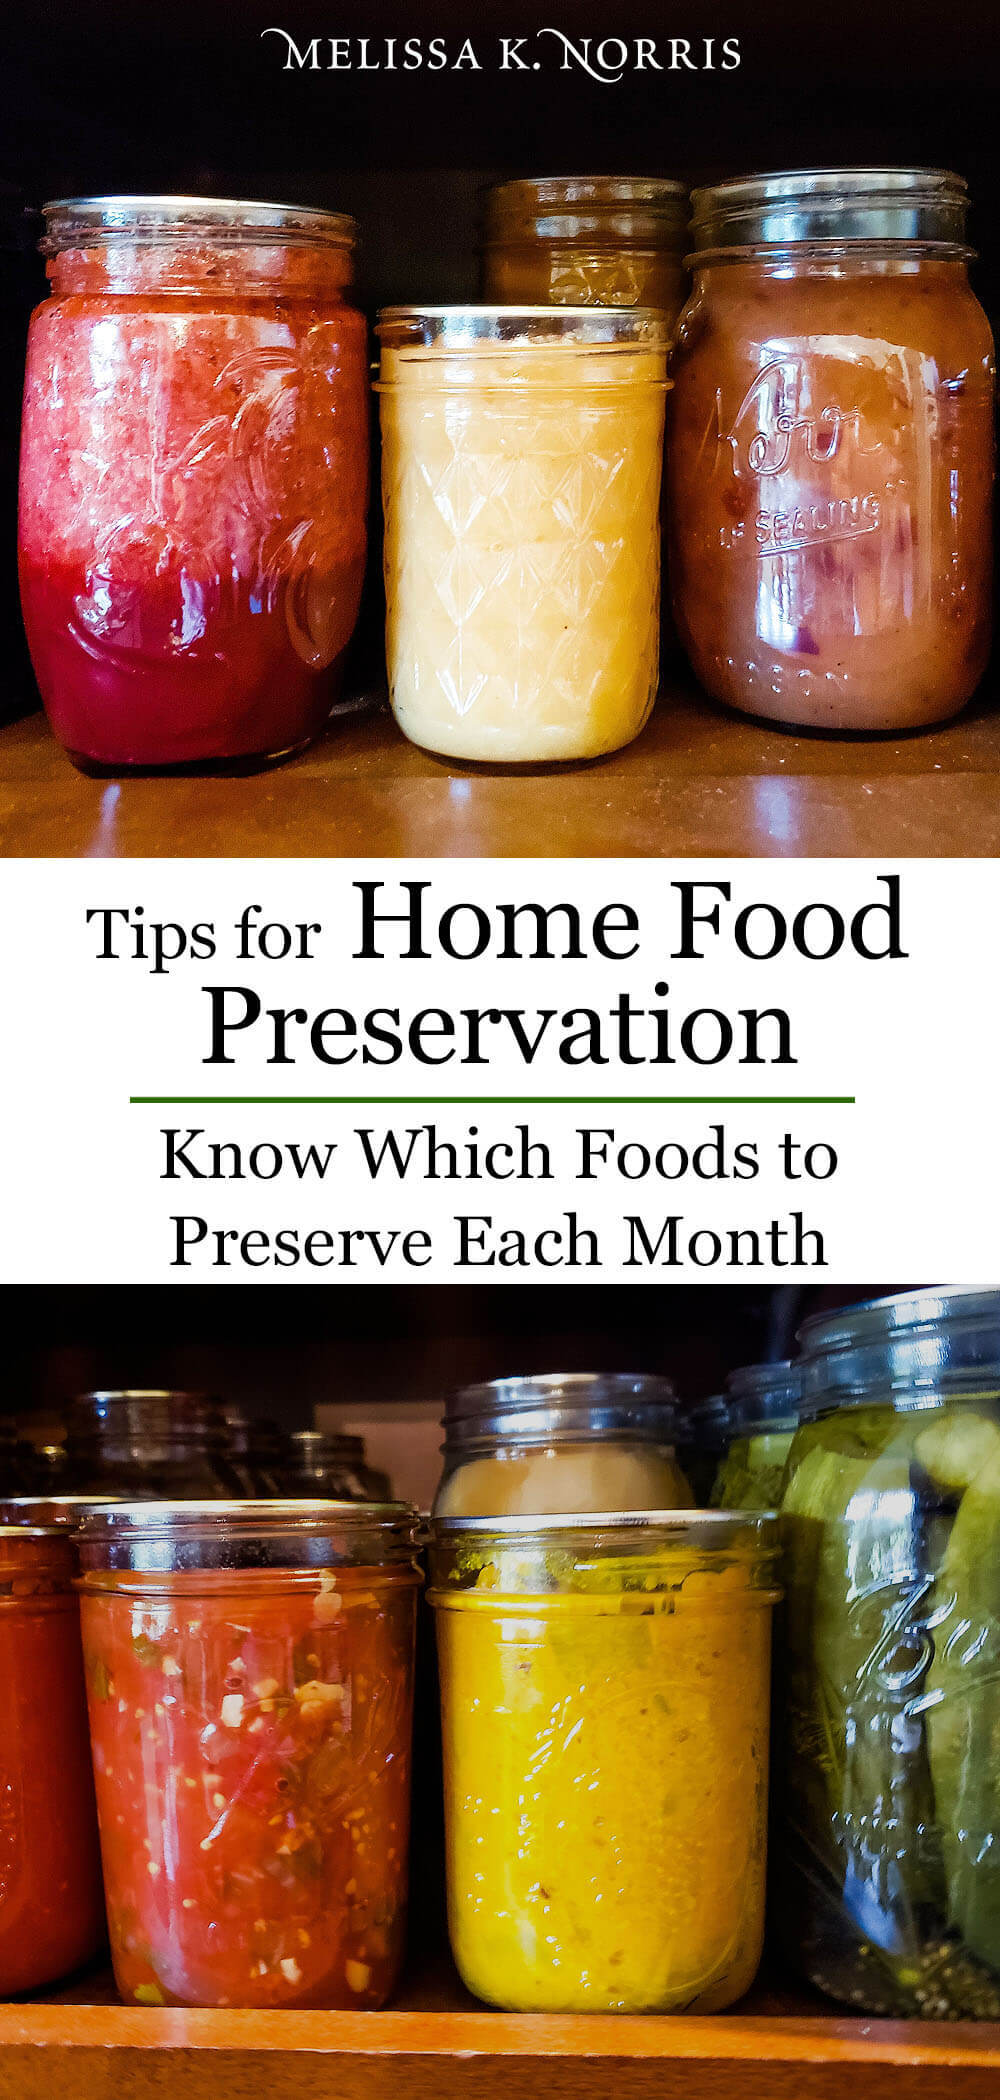 Home preserved foods: Nutrition friend or foe? - Food Blog - ANR Blogs